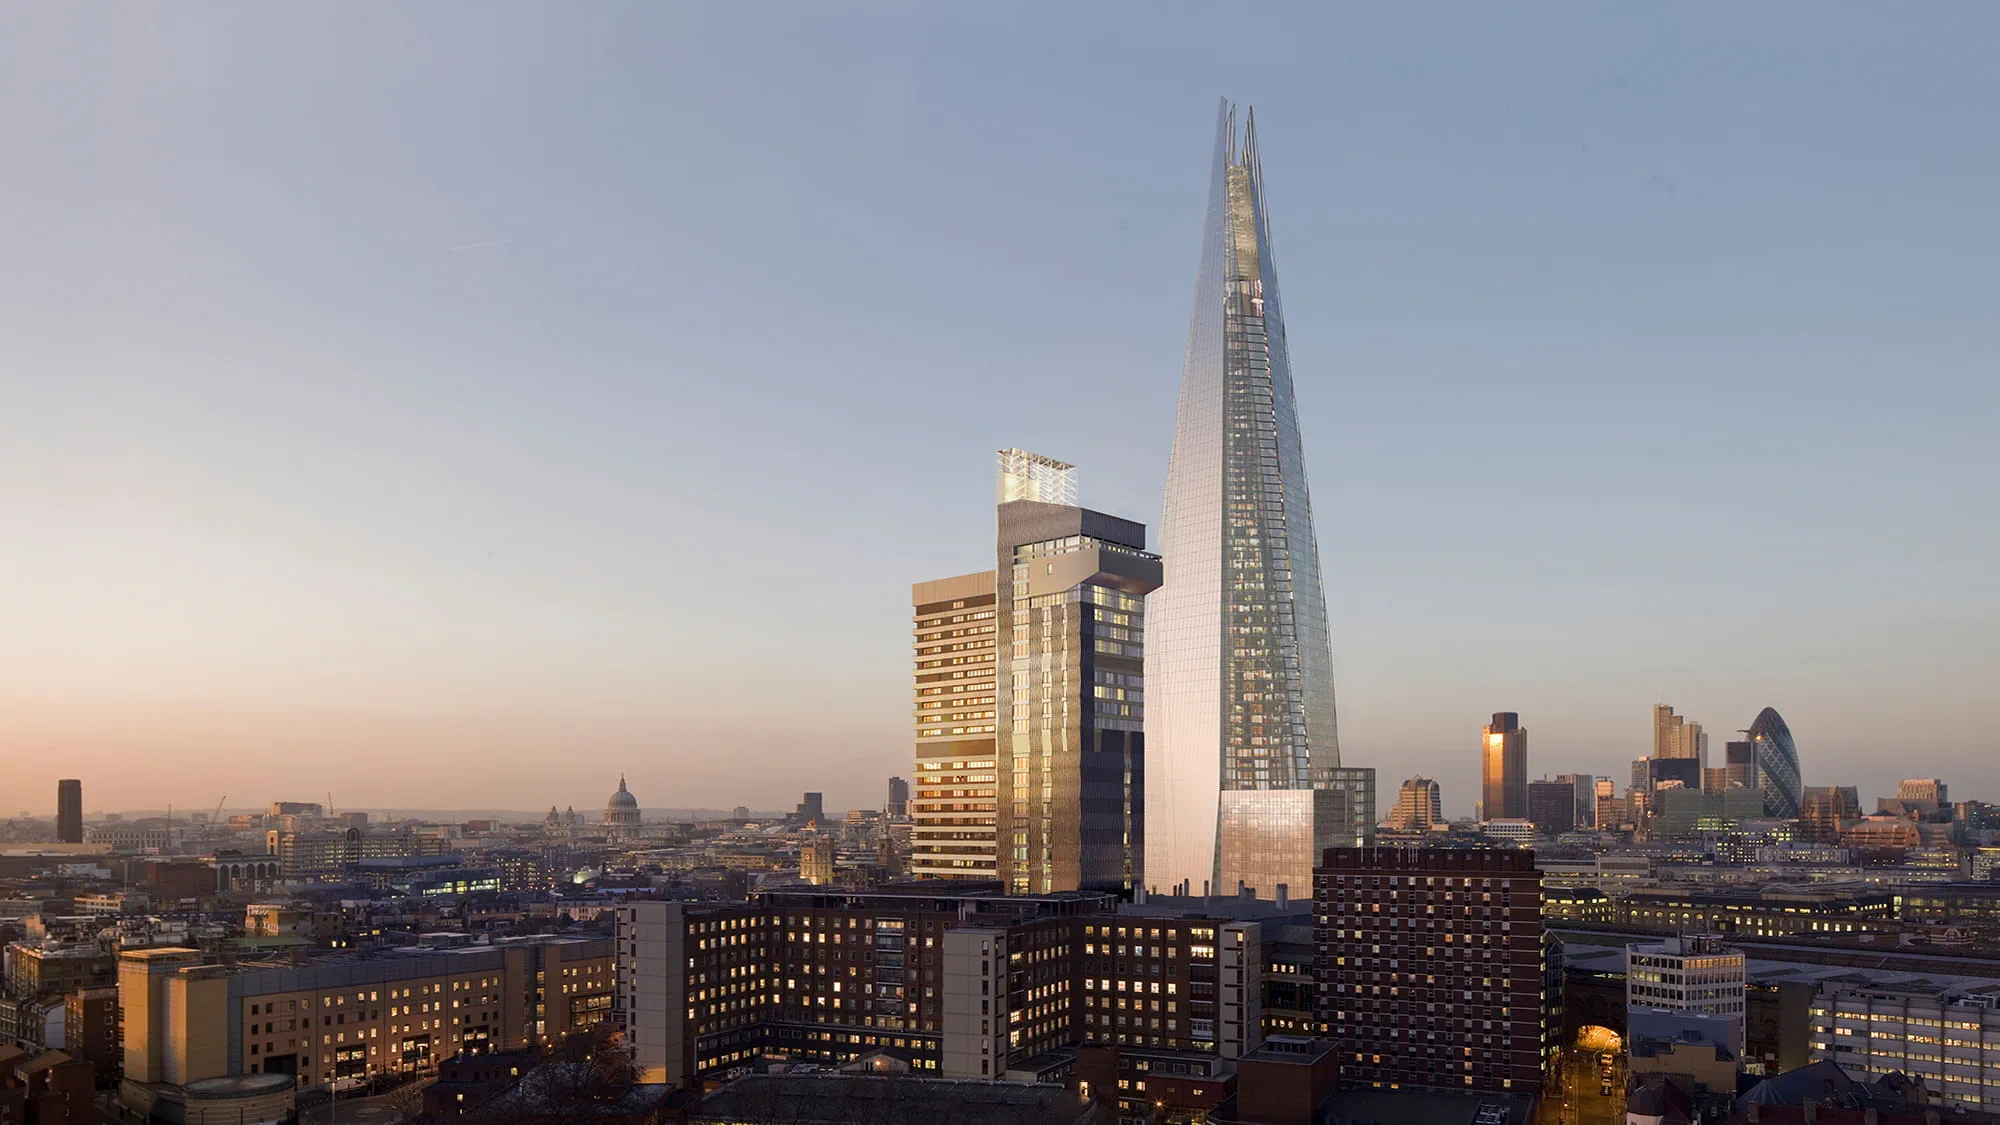 Guy’s Tower, an iconic silhouette on the London skyline has been given a complete new skin. After nearly 40 years as one of London’s most recognisable buildings, Guy’s Tower needed a major refurbishment to fix the environmental damage to its exterior facade and reduce the high energy consumption of the building.